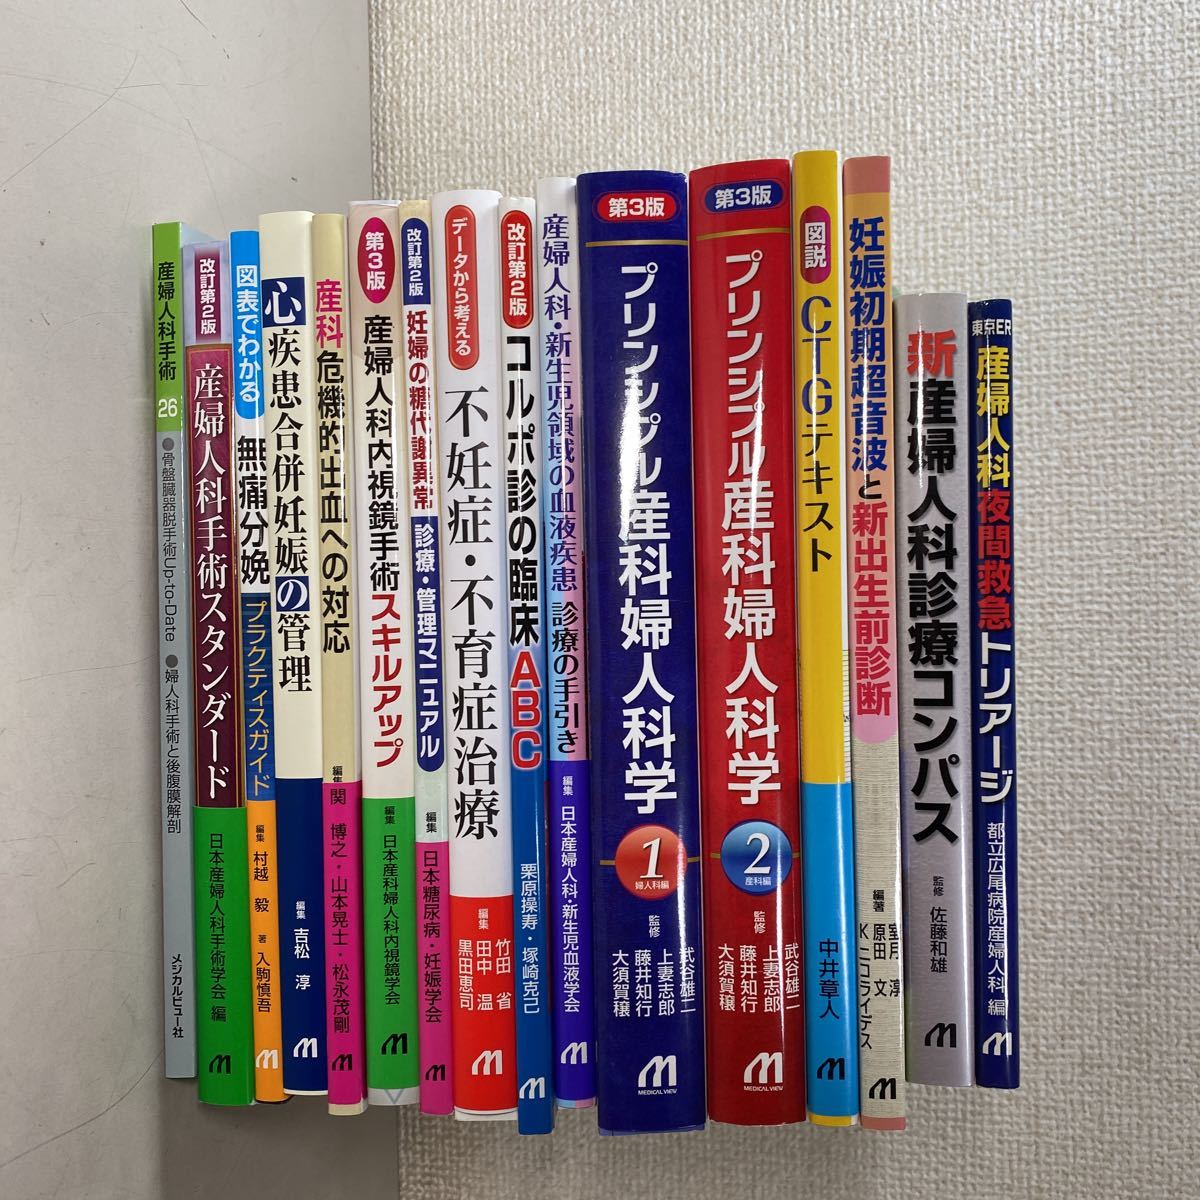 c*☆中古品 産婦人科 医学書 まとめて16冊セット MEDICAL VIEW